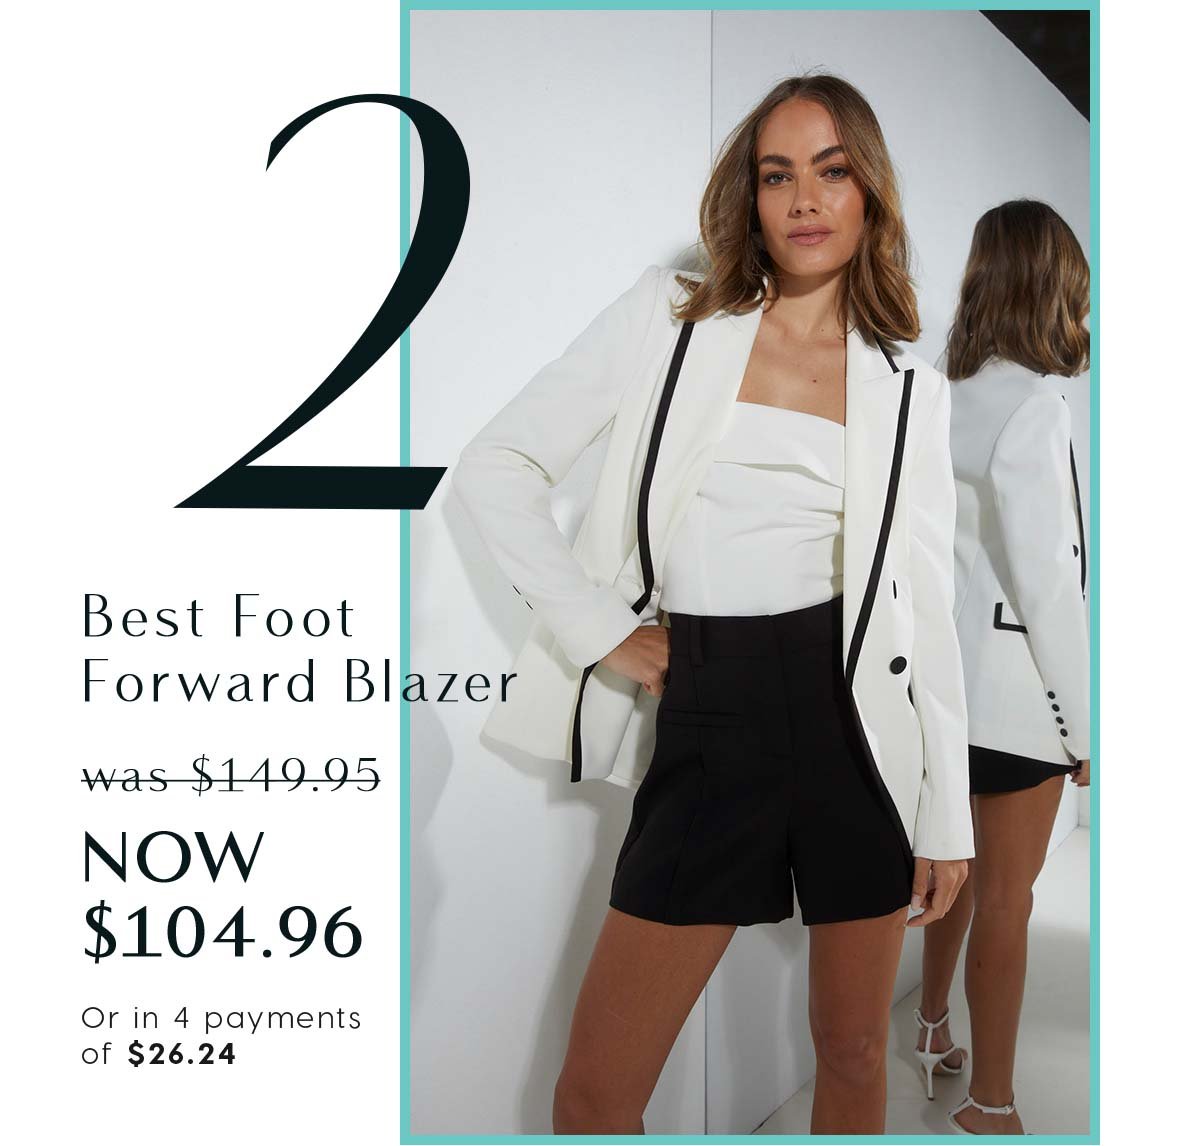 2. Best Foot Forward Blazer  was $149.95 NOW $104.96  Or in 4 payments of $26.24